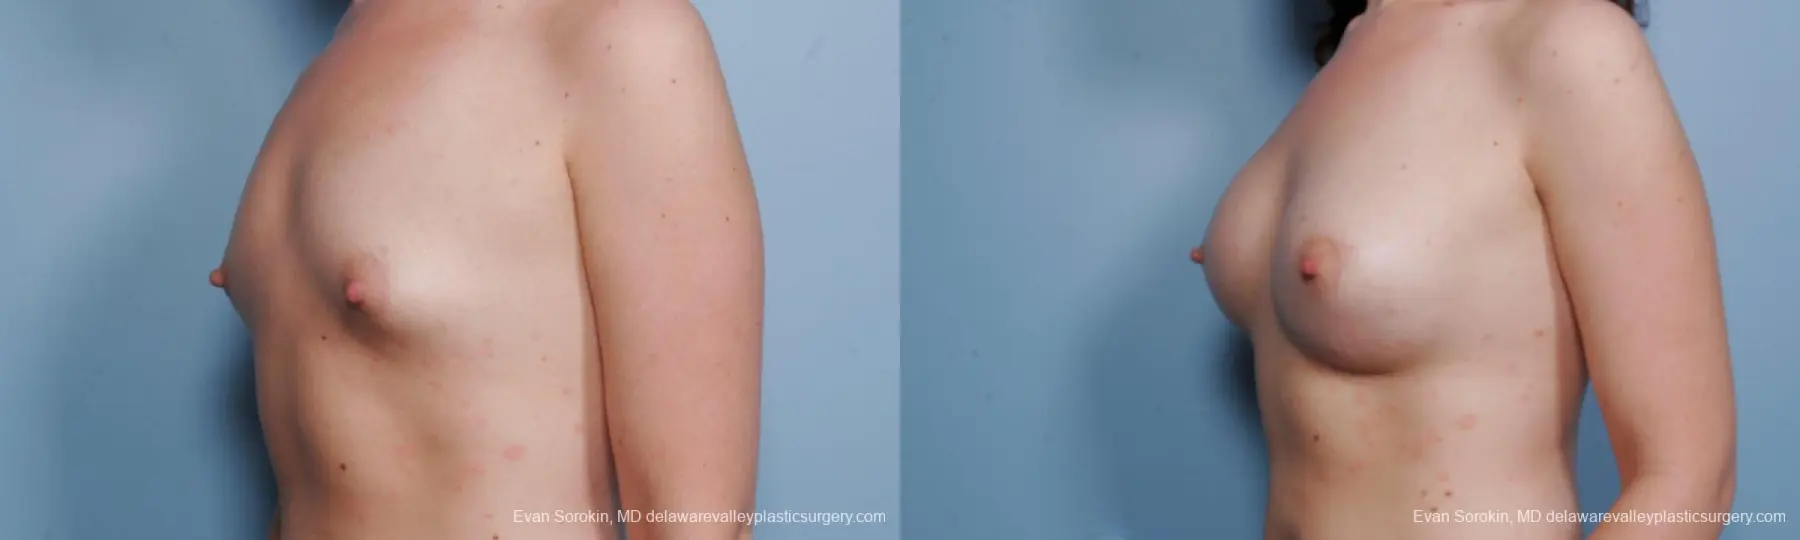 Philadelphia Breast Augmentation 9176 - Before and After 4